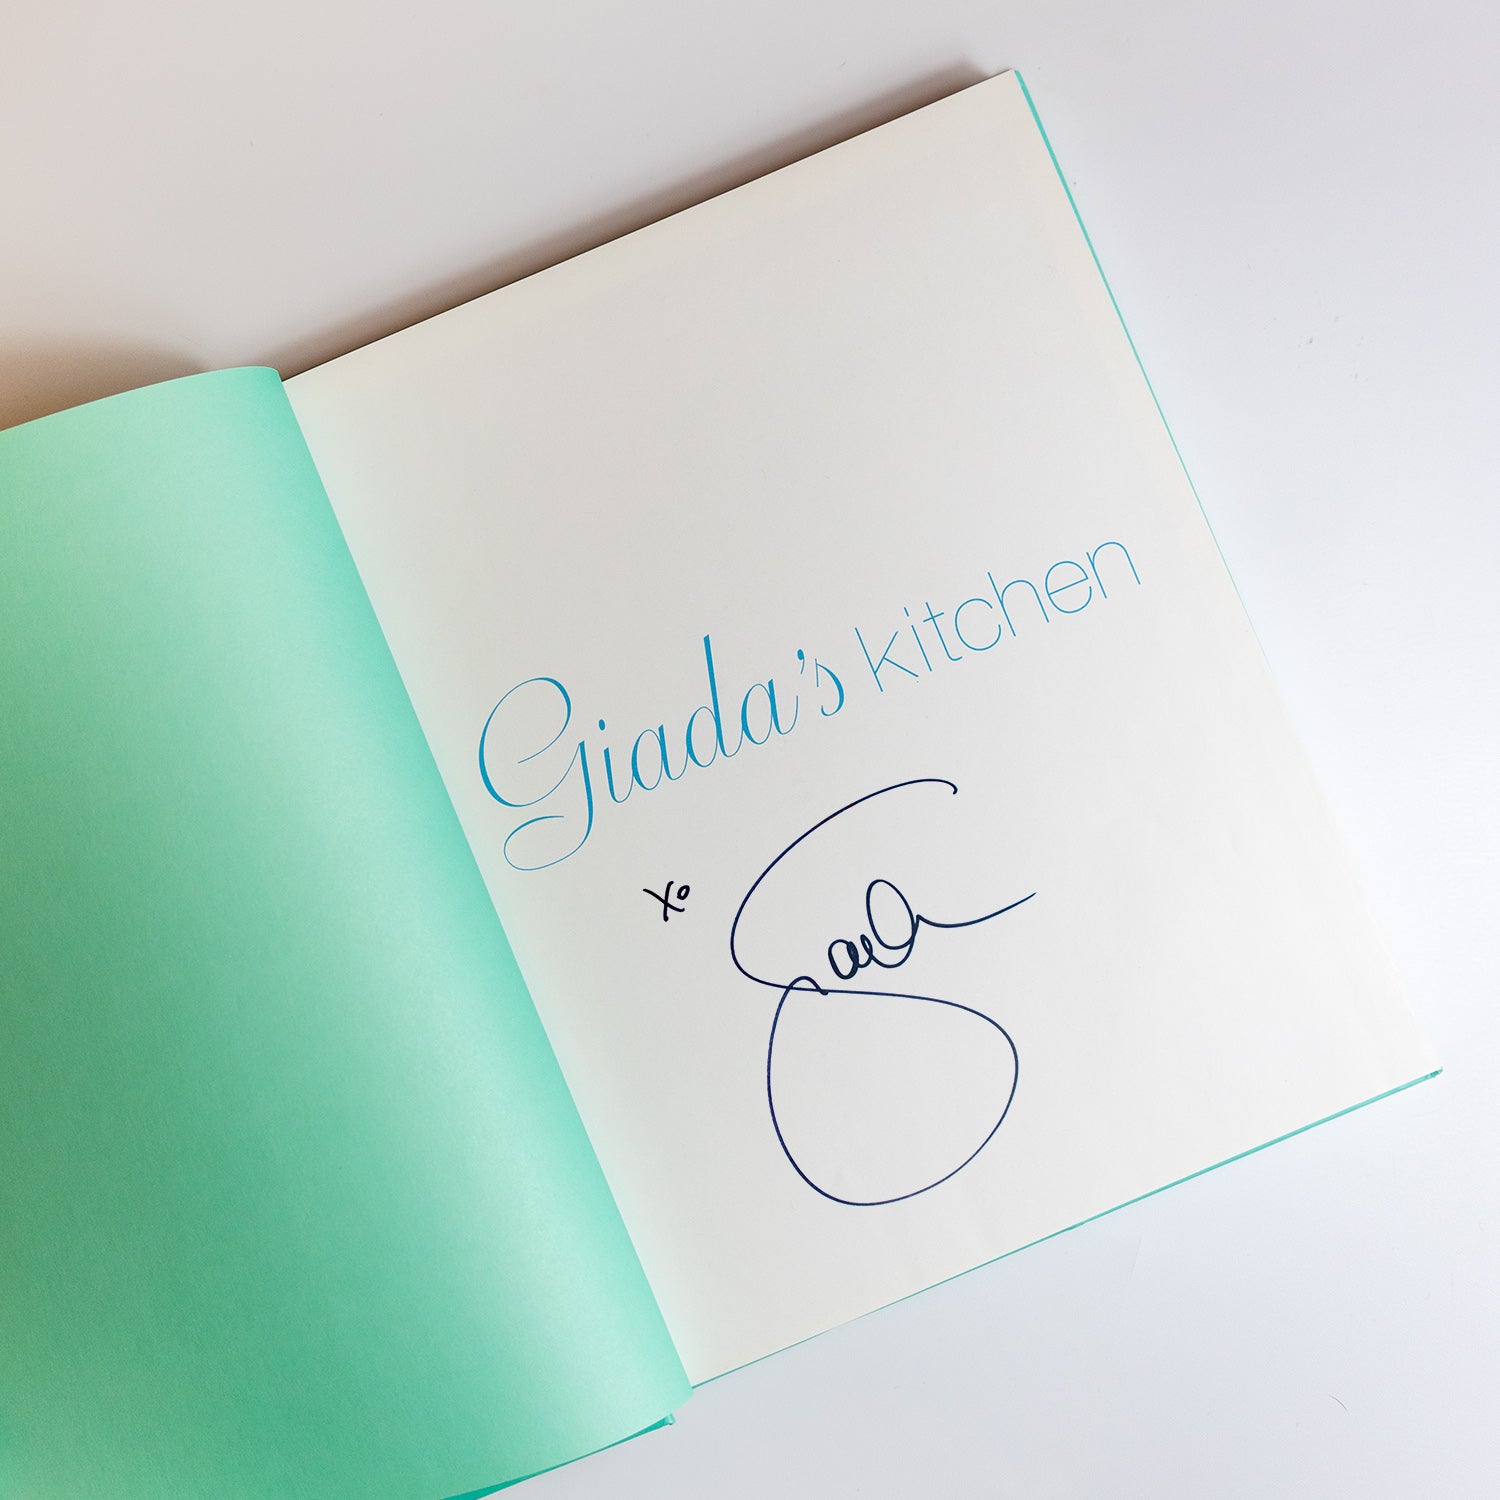 Giada's Kitchen Signed Book